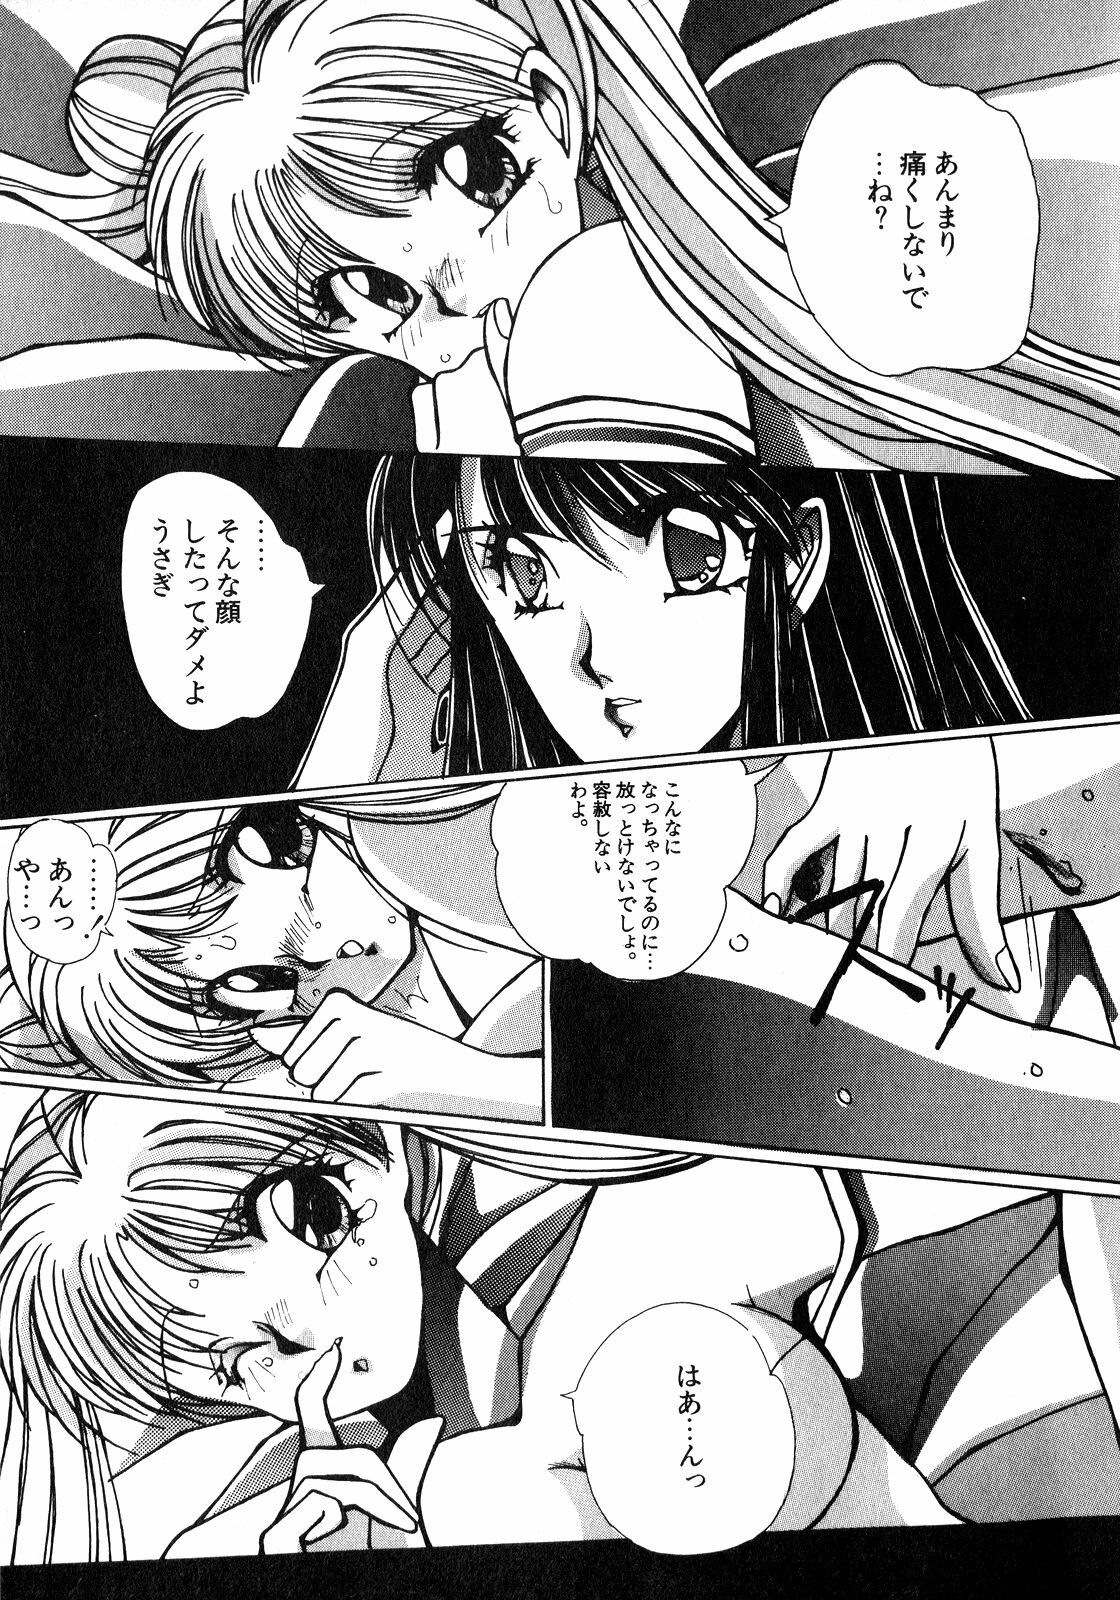 [Anthology] Lunatic Party 8 (Sailor Moon) page 40 full